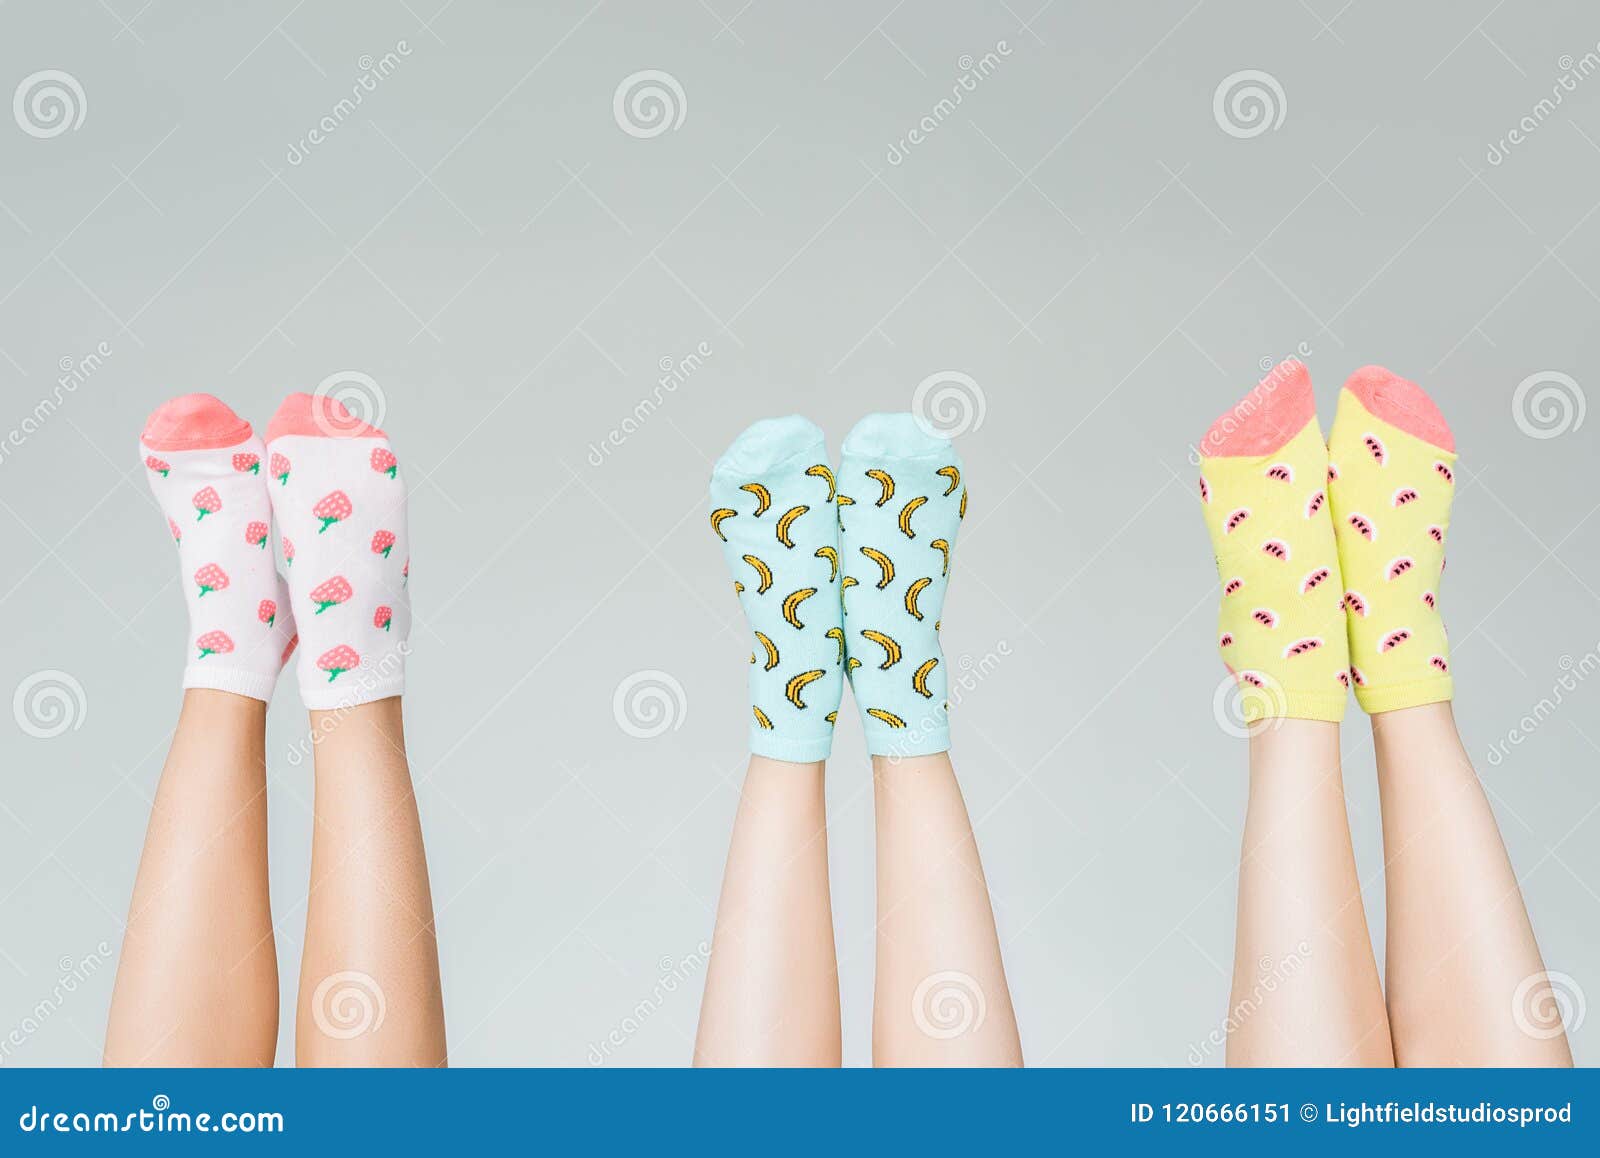 Cropped Image of Female Legs in Different Colorful Socks Stock Image ...